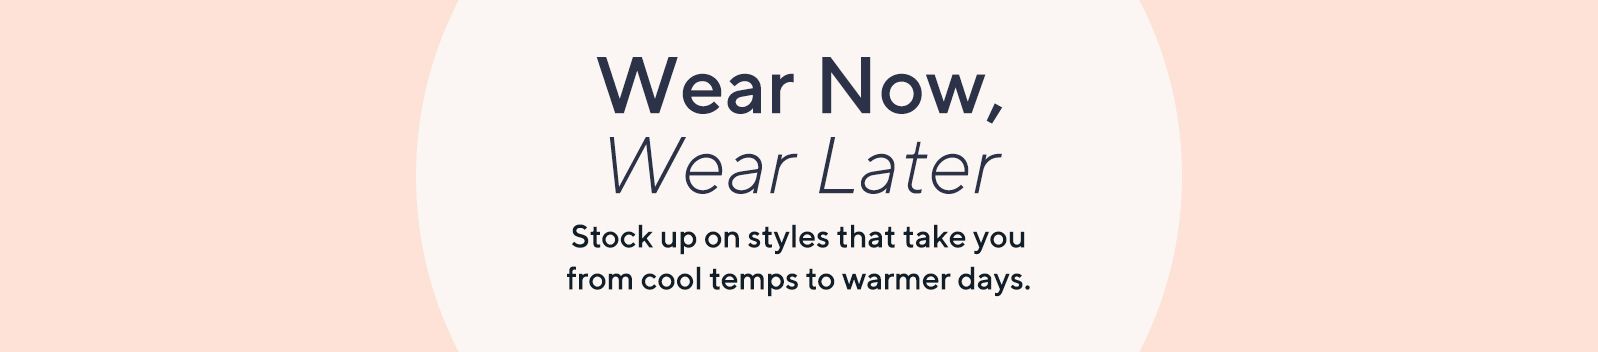 Wear Now, Wear Later Stock up on styles that take you from cool temps to warmer days.